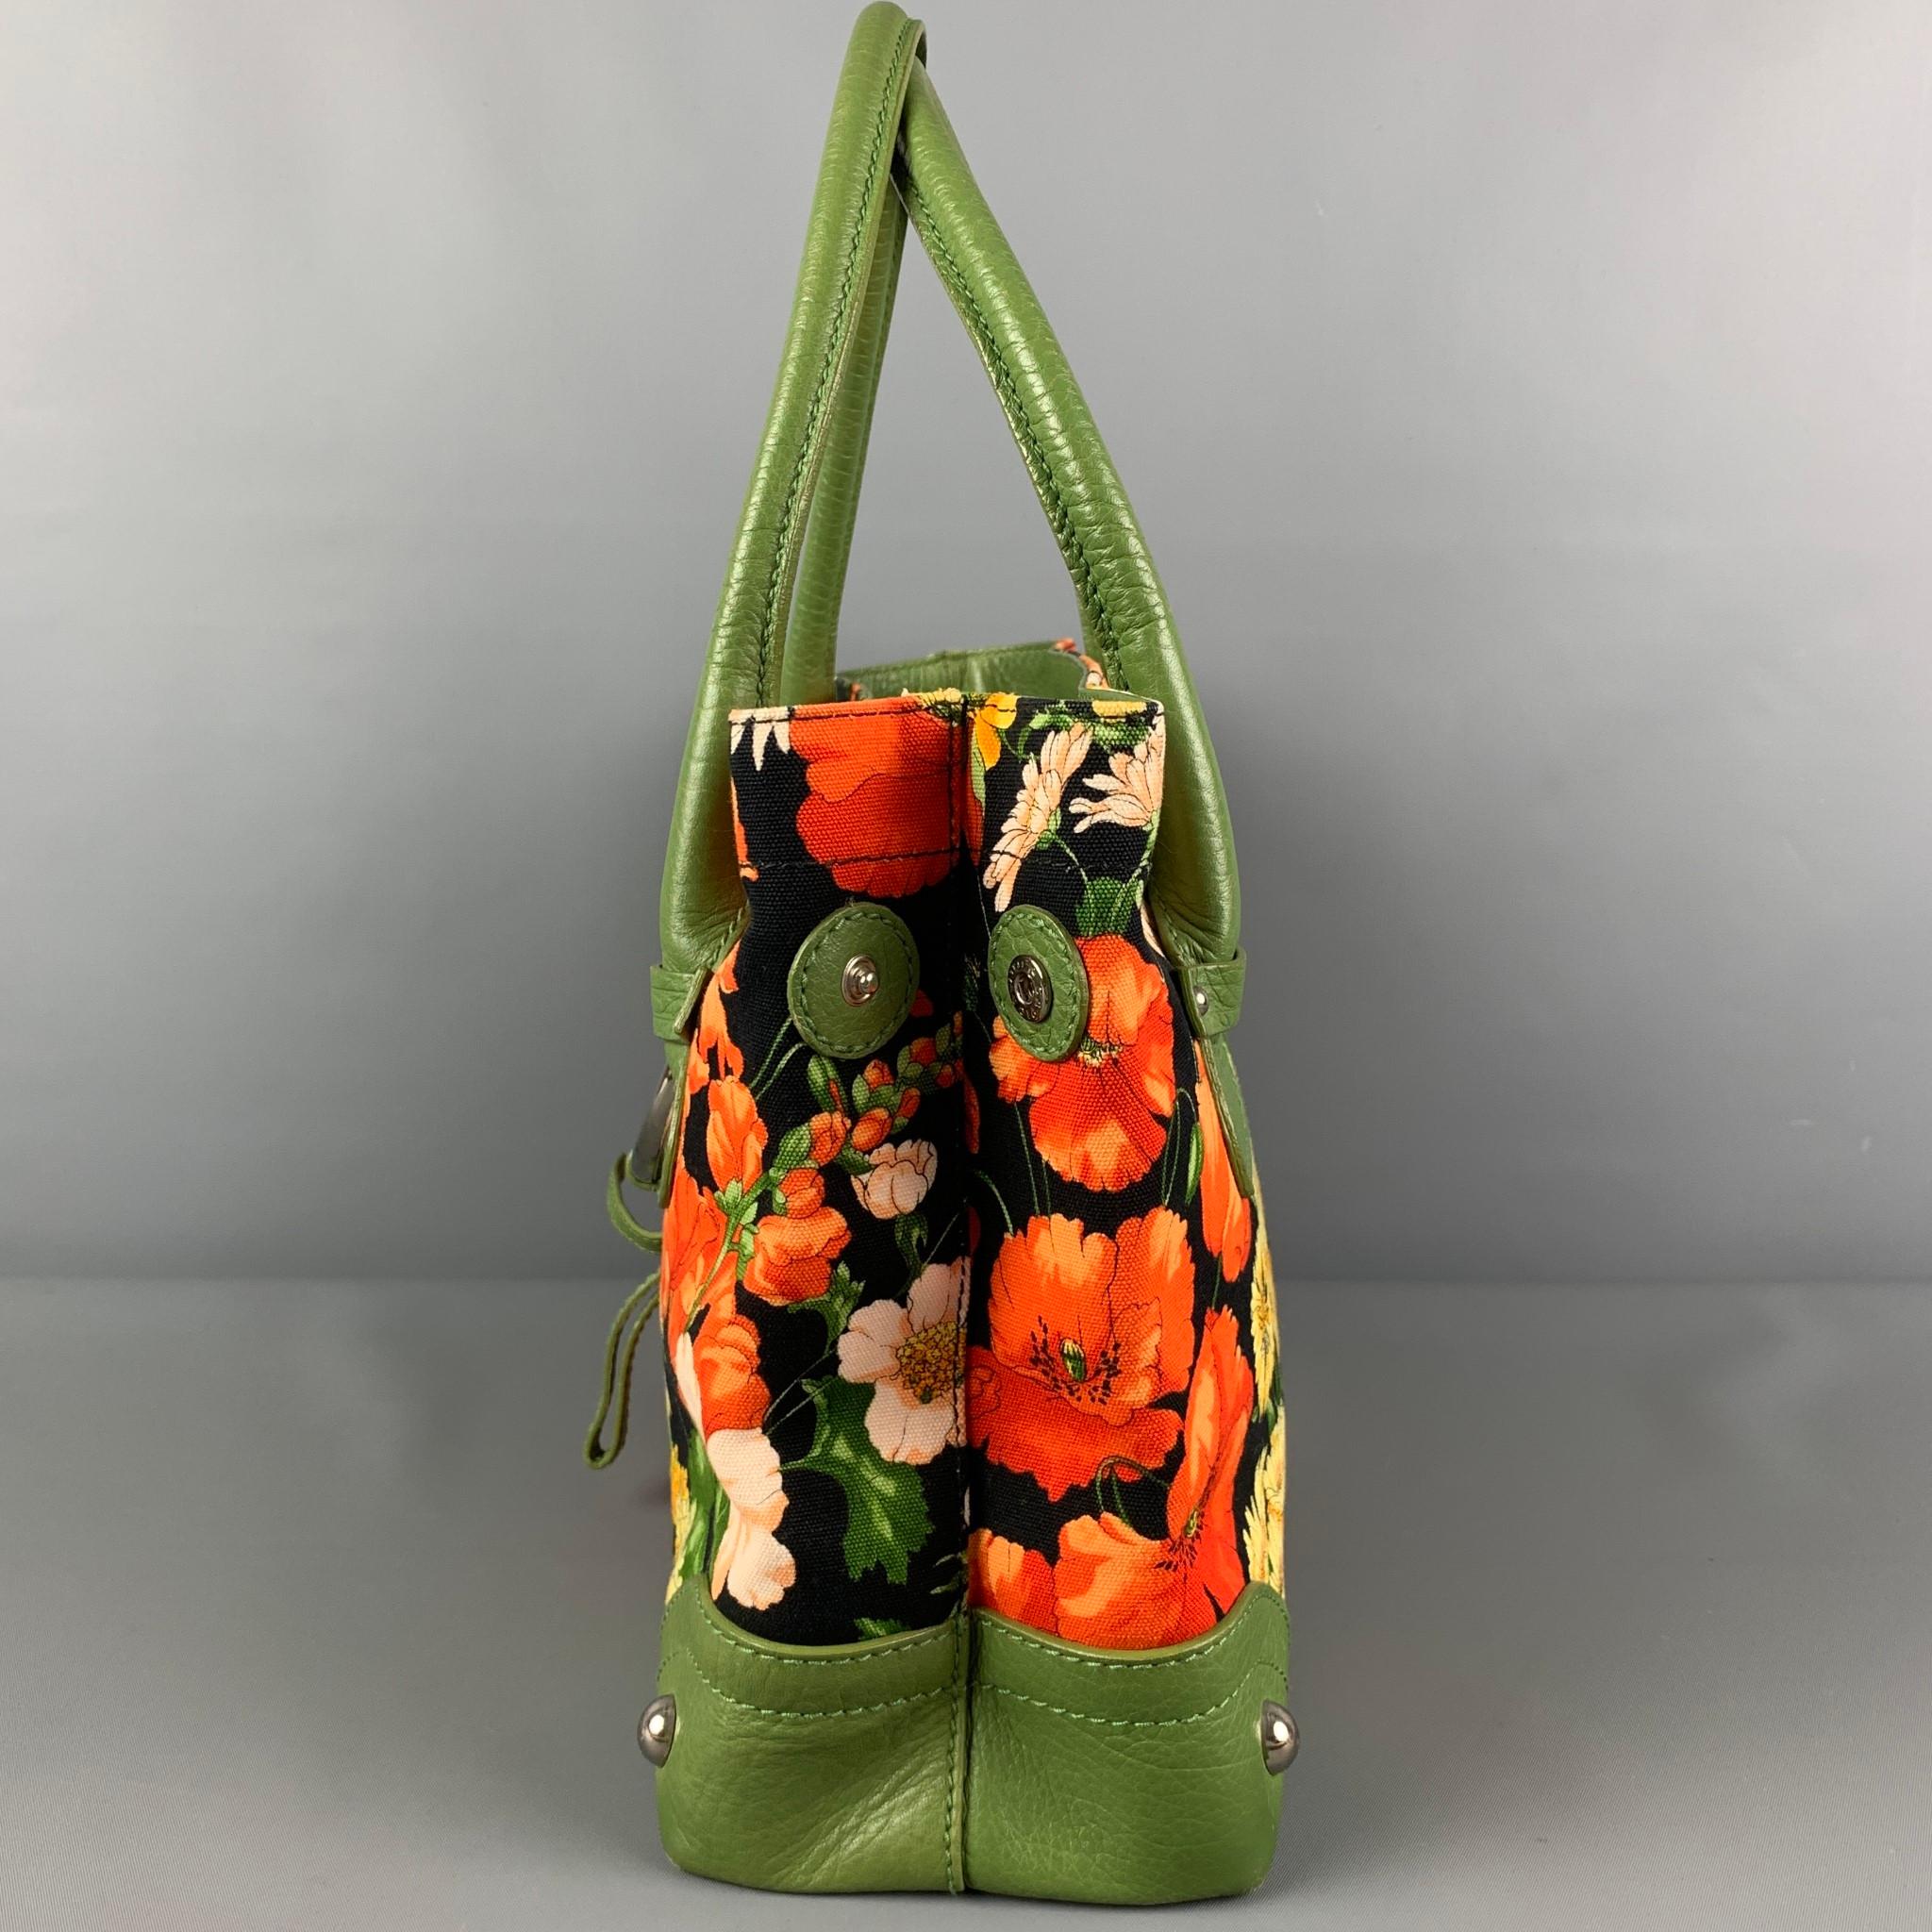 DOLCE & GABBANA handbag comes in a multi-color floral canvas material with a green leather trim featuring a tote style, side buttons, inner pocket, and top handles. Made in Italy. 

Good Pre-Owned Condition. Light wear. As-